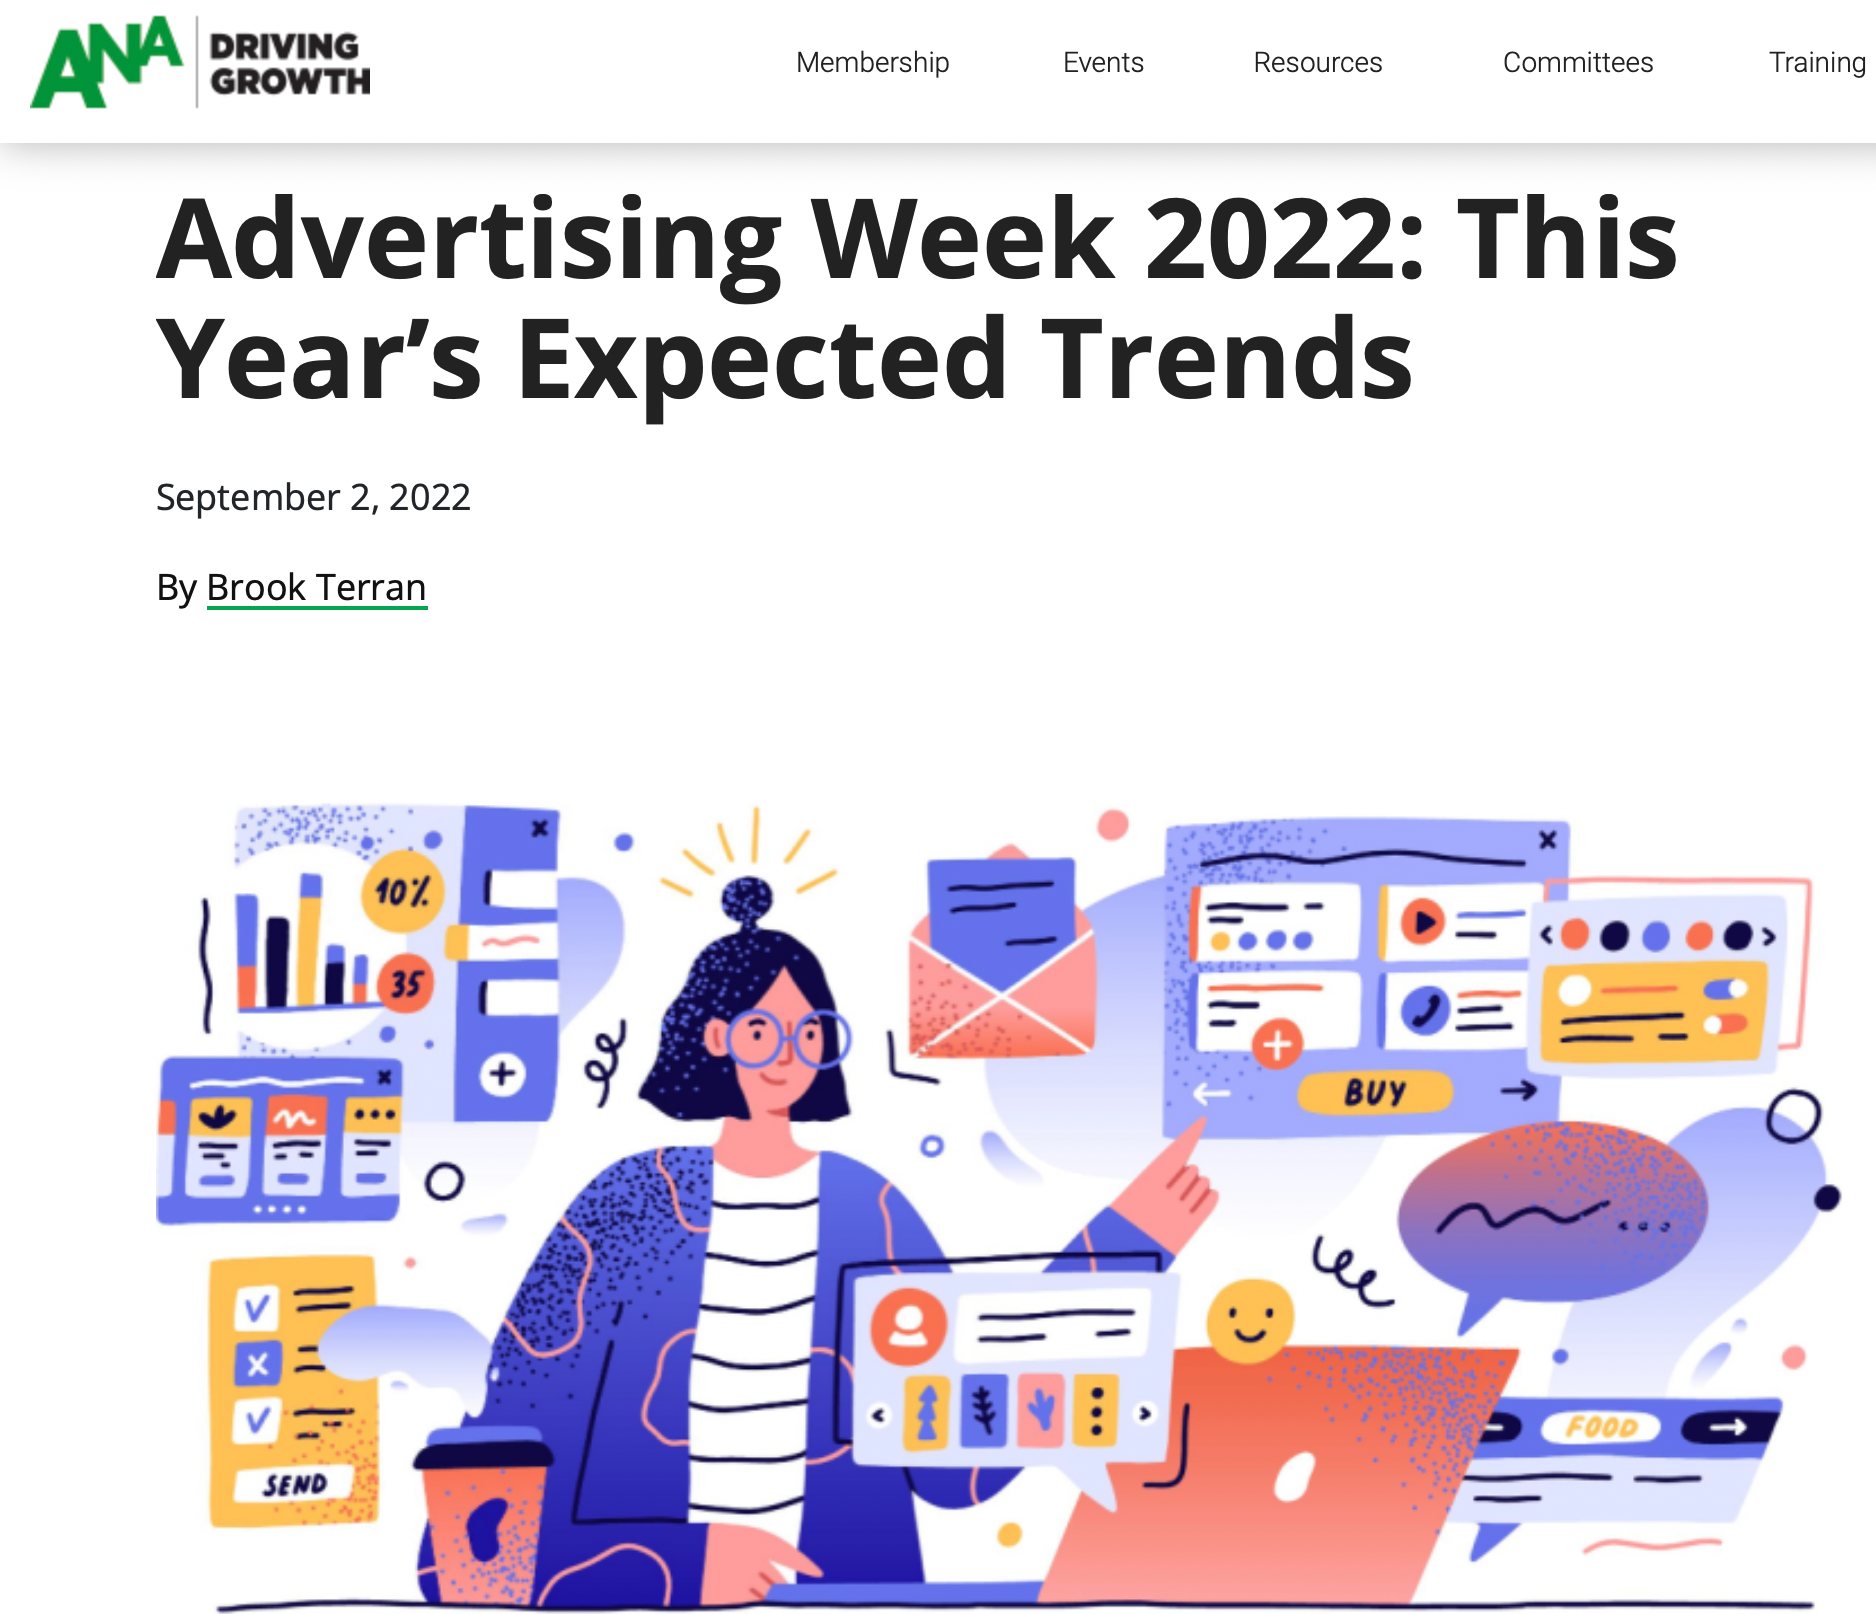 Advertising Week 2022: This Year’s Expected Trends